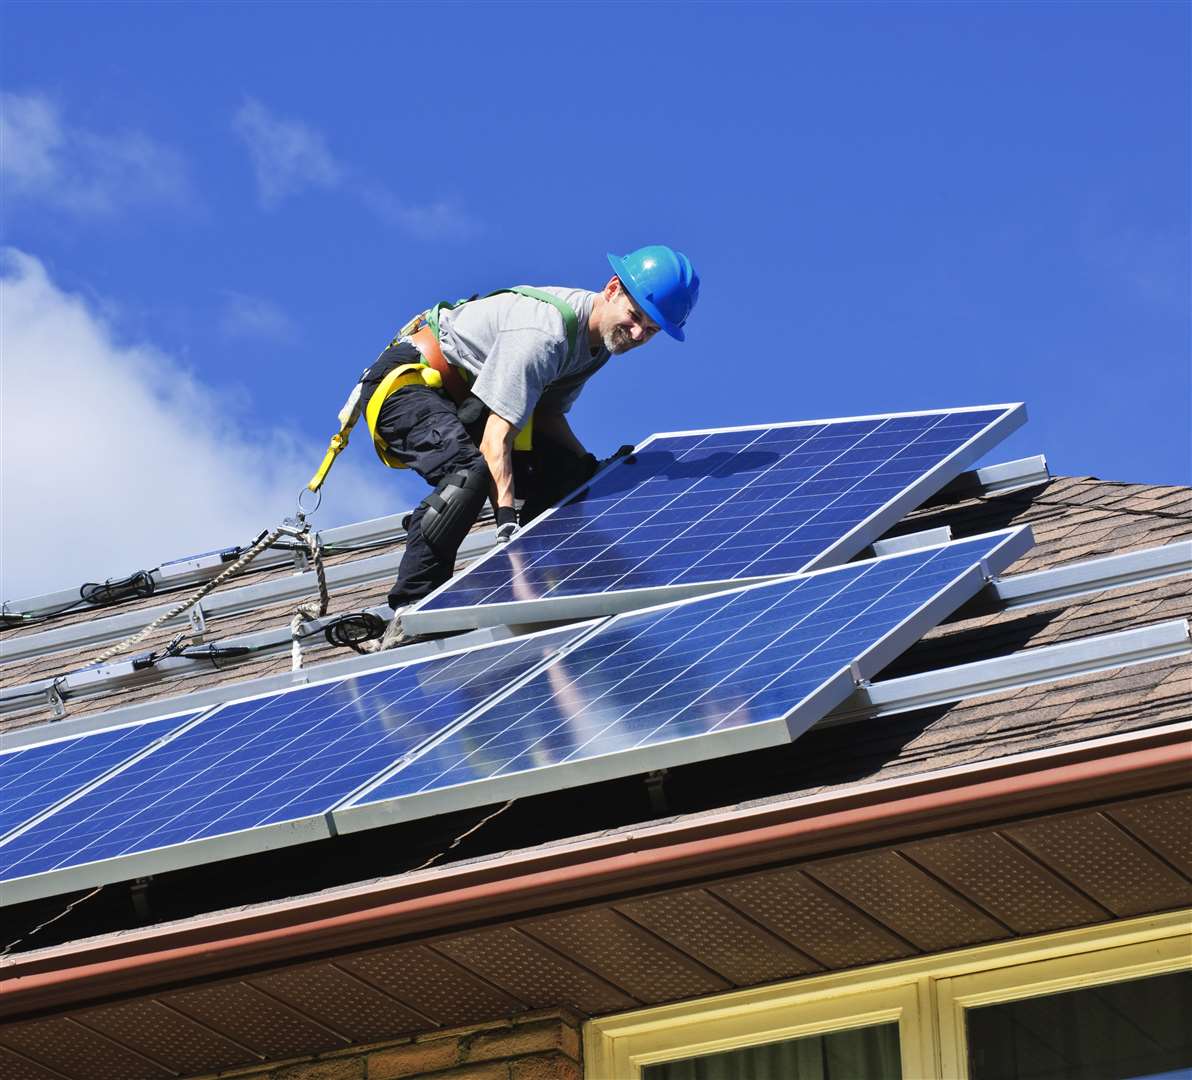 Installation of solar panels has been booming in recent years – but according to insurers, the cost of living crisis is helping to drive a theft trend too.